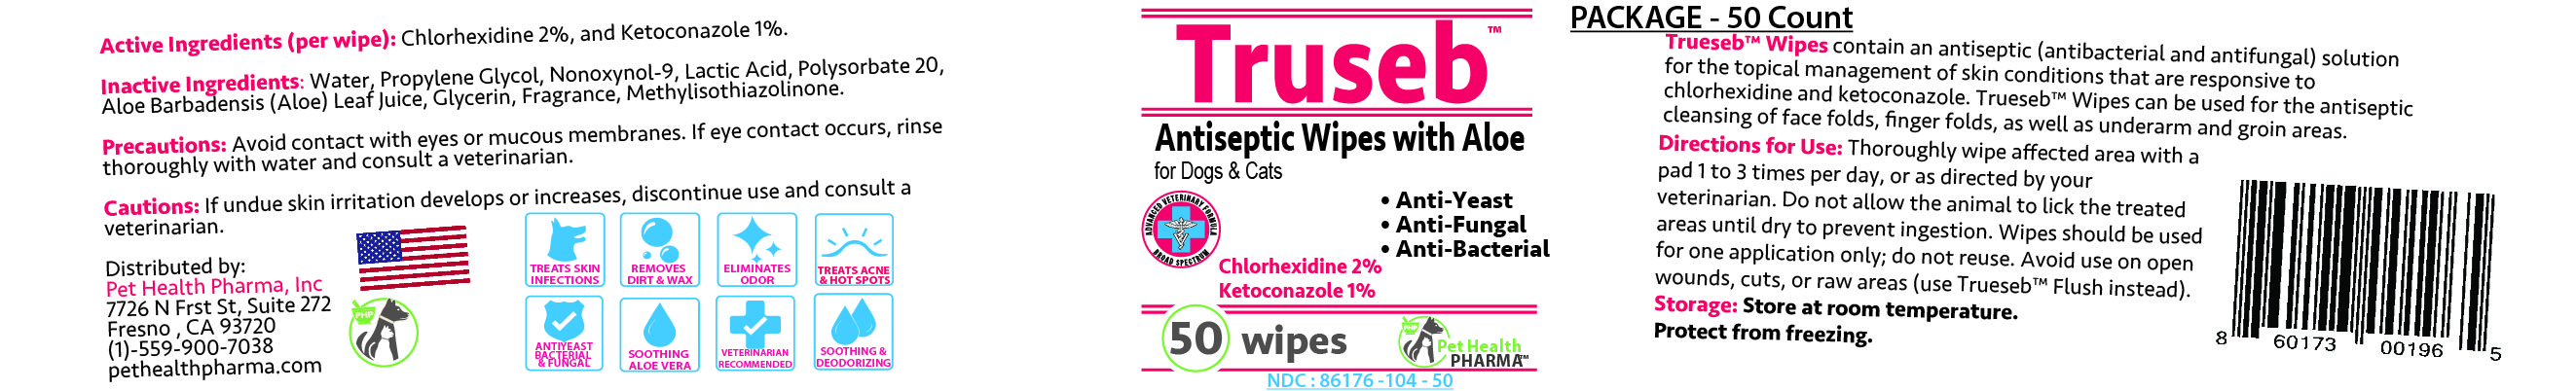 Truseb Antiseptic Wipes with Aloe for Dogs And Cats 50 count